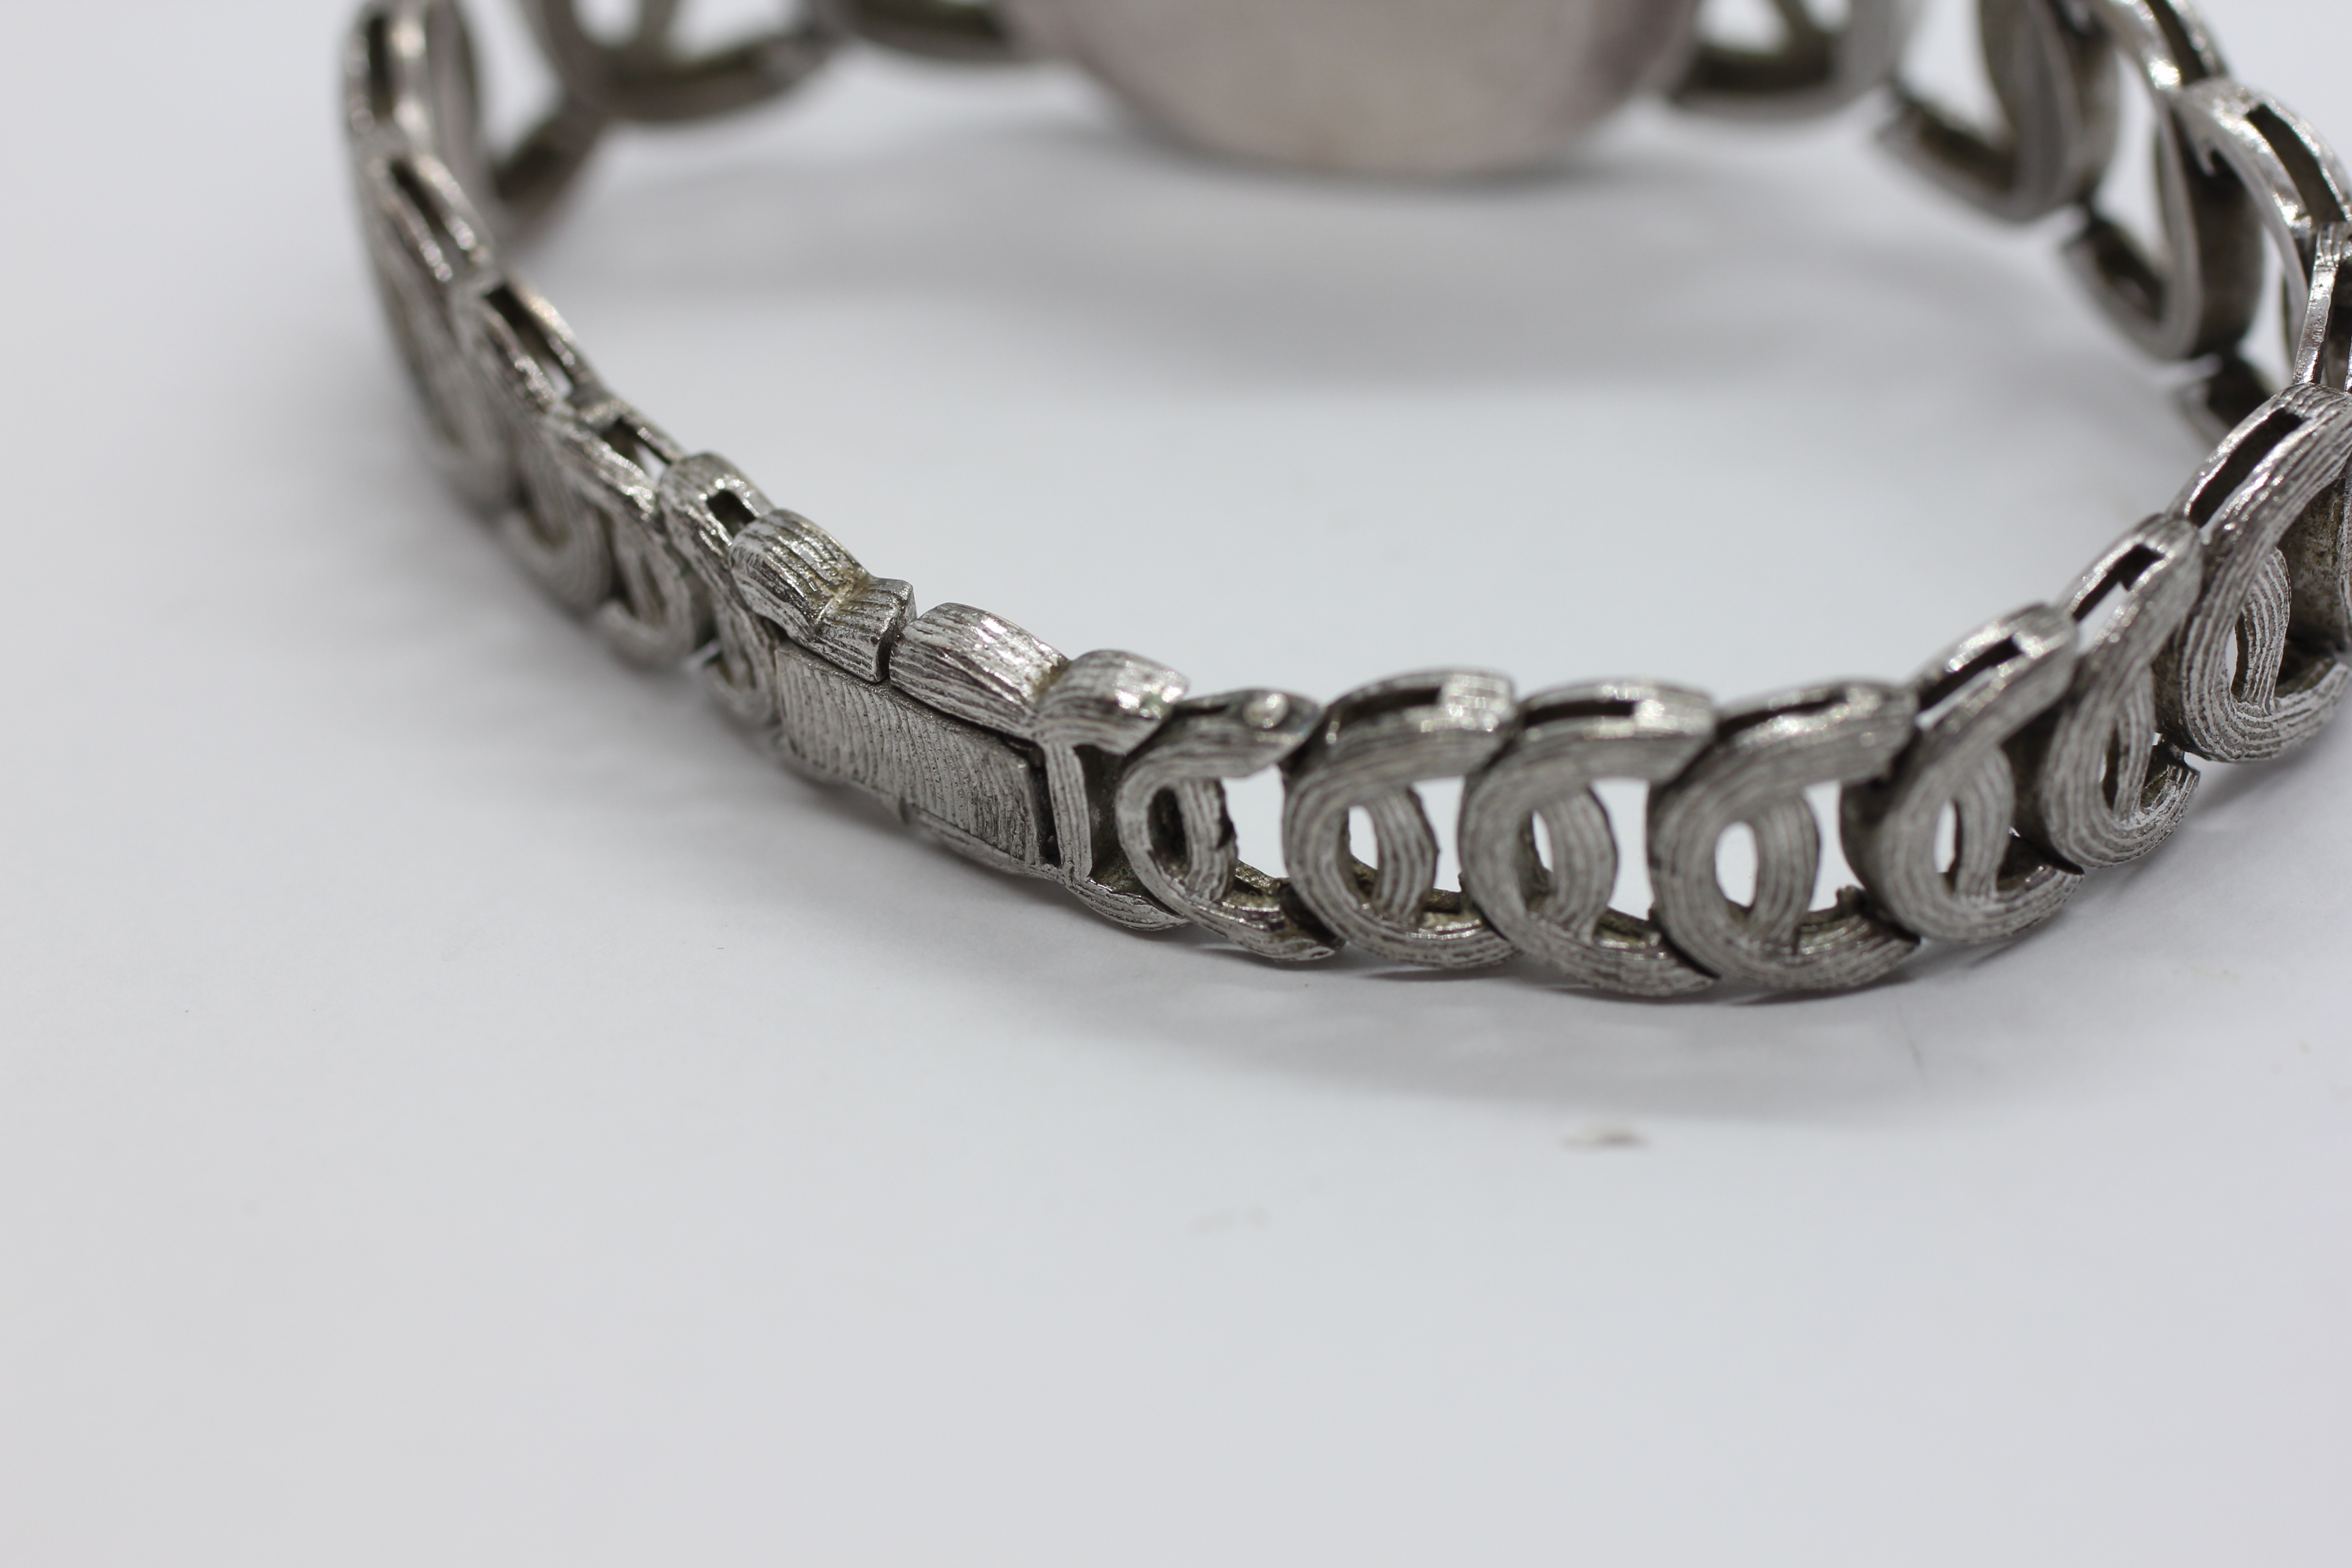 A LADIES SILVER ROTARY WRIST WATCH ON LINKED BRACELET. - Image 8 of 9